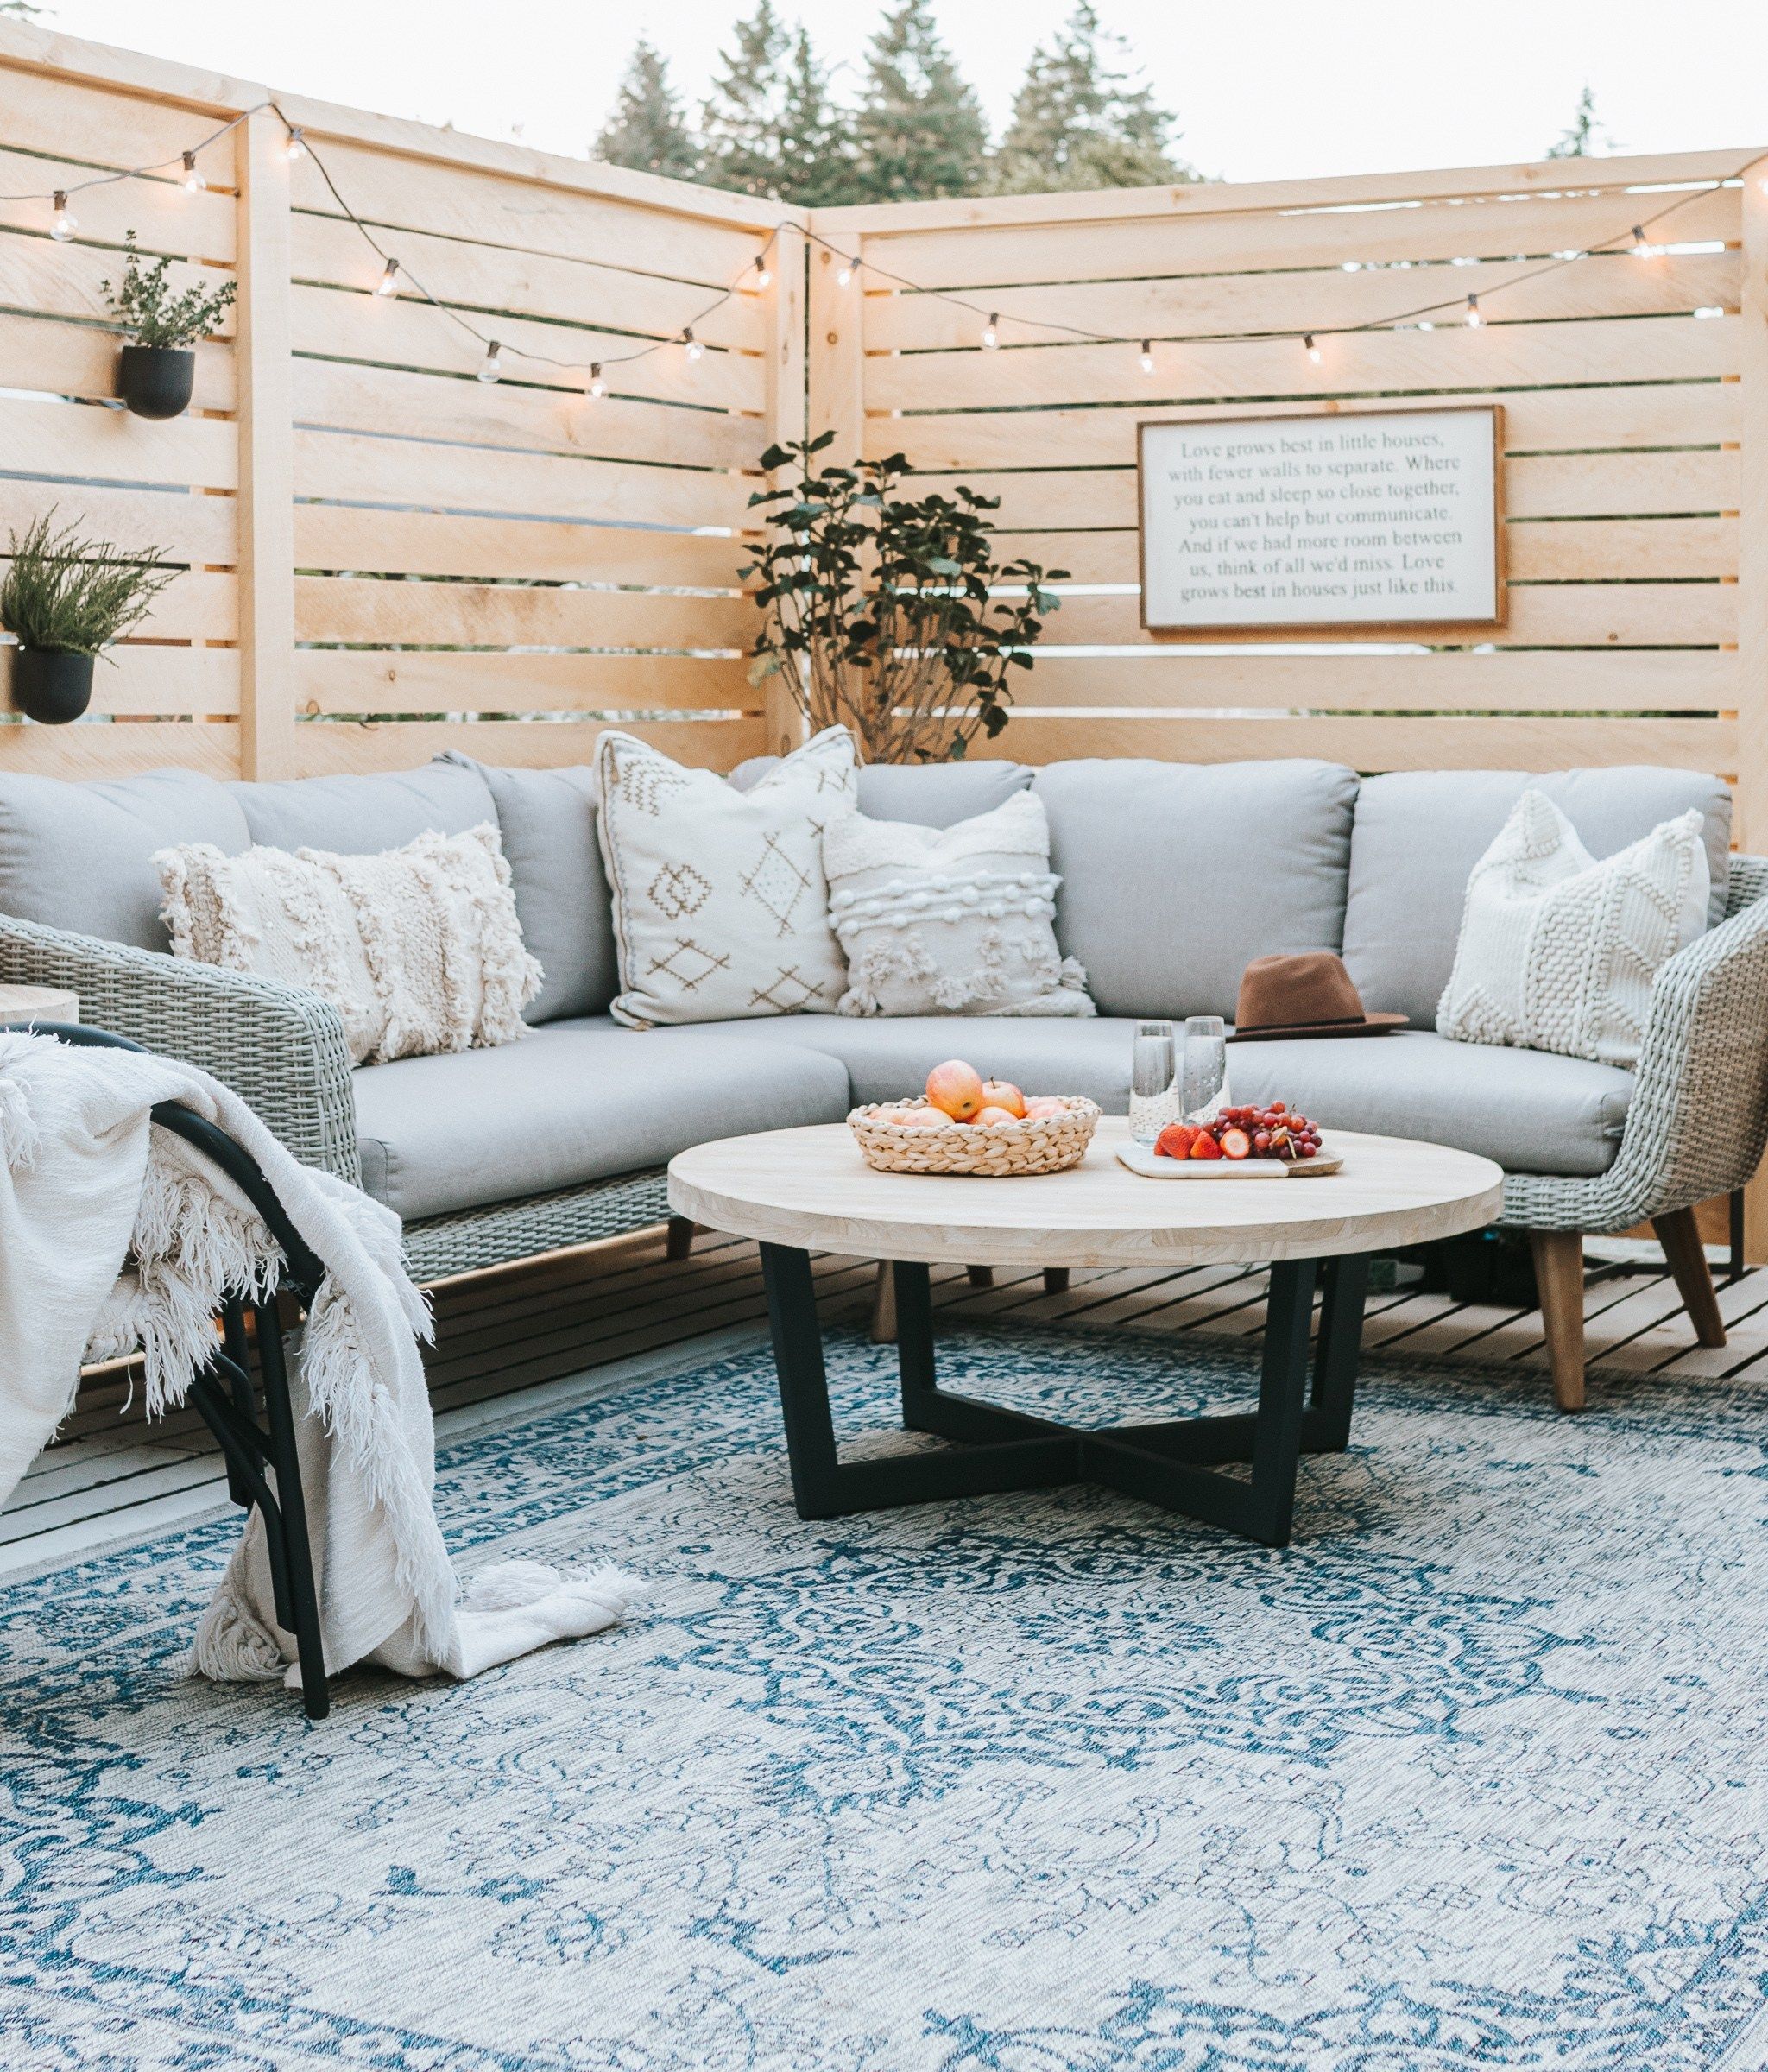 Outdoor Decorating Ideas: Tips on How to
Decorate Outdoors